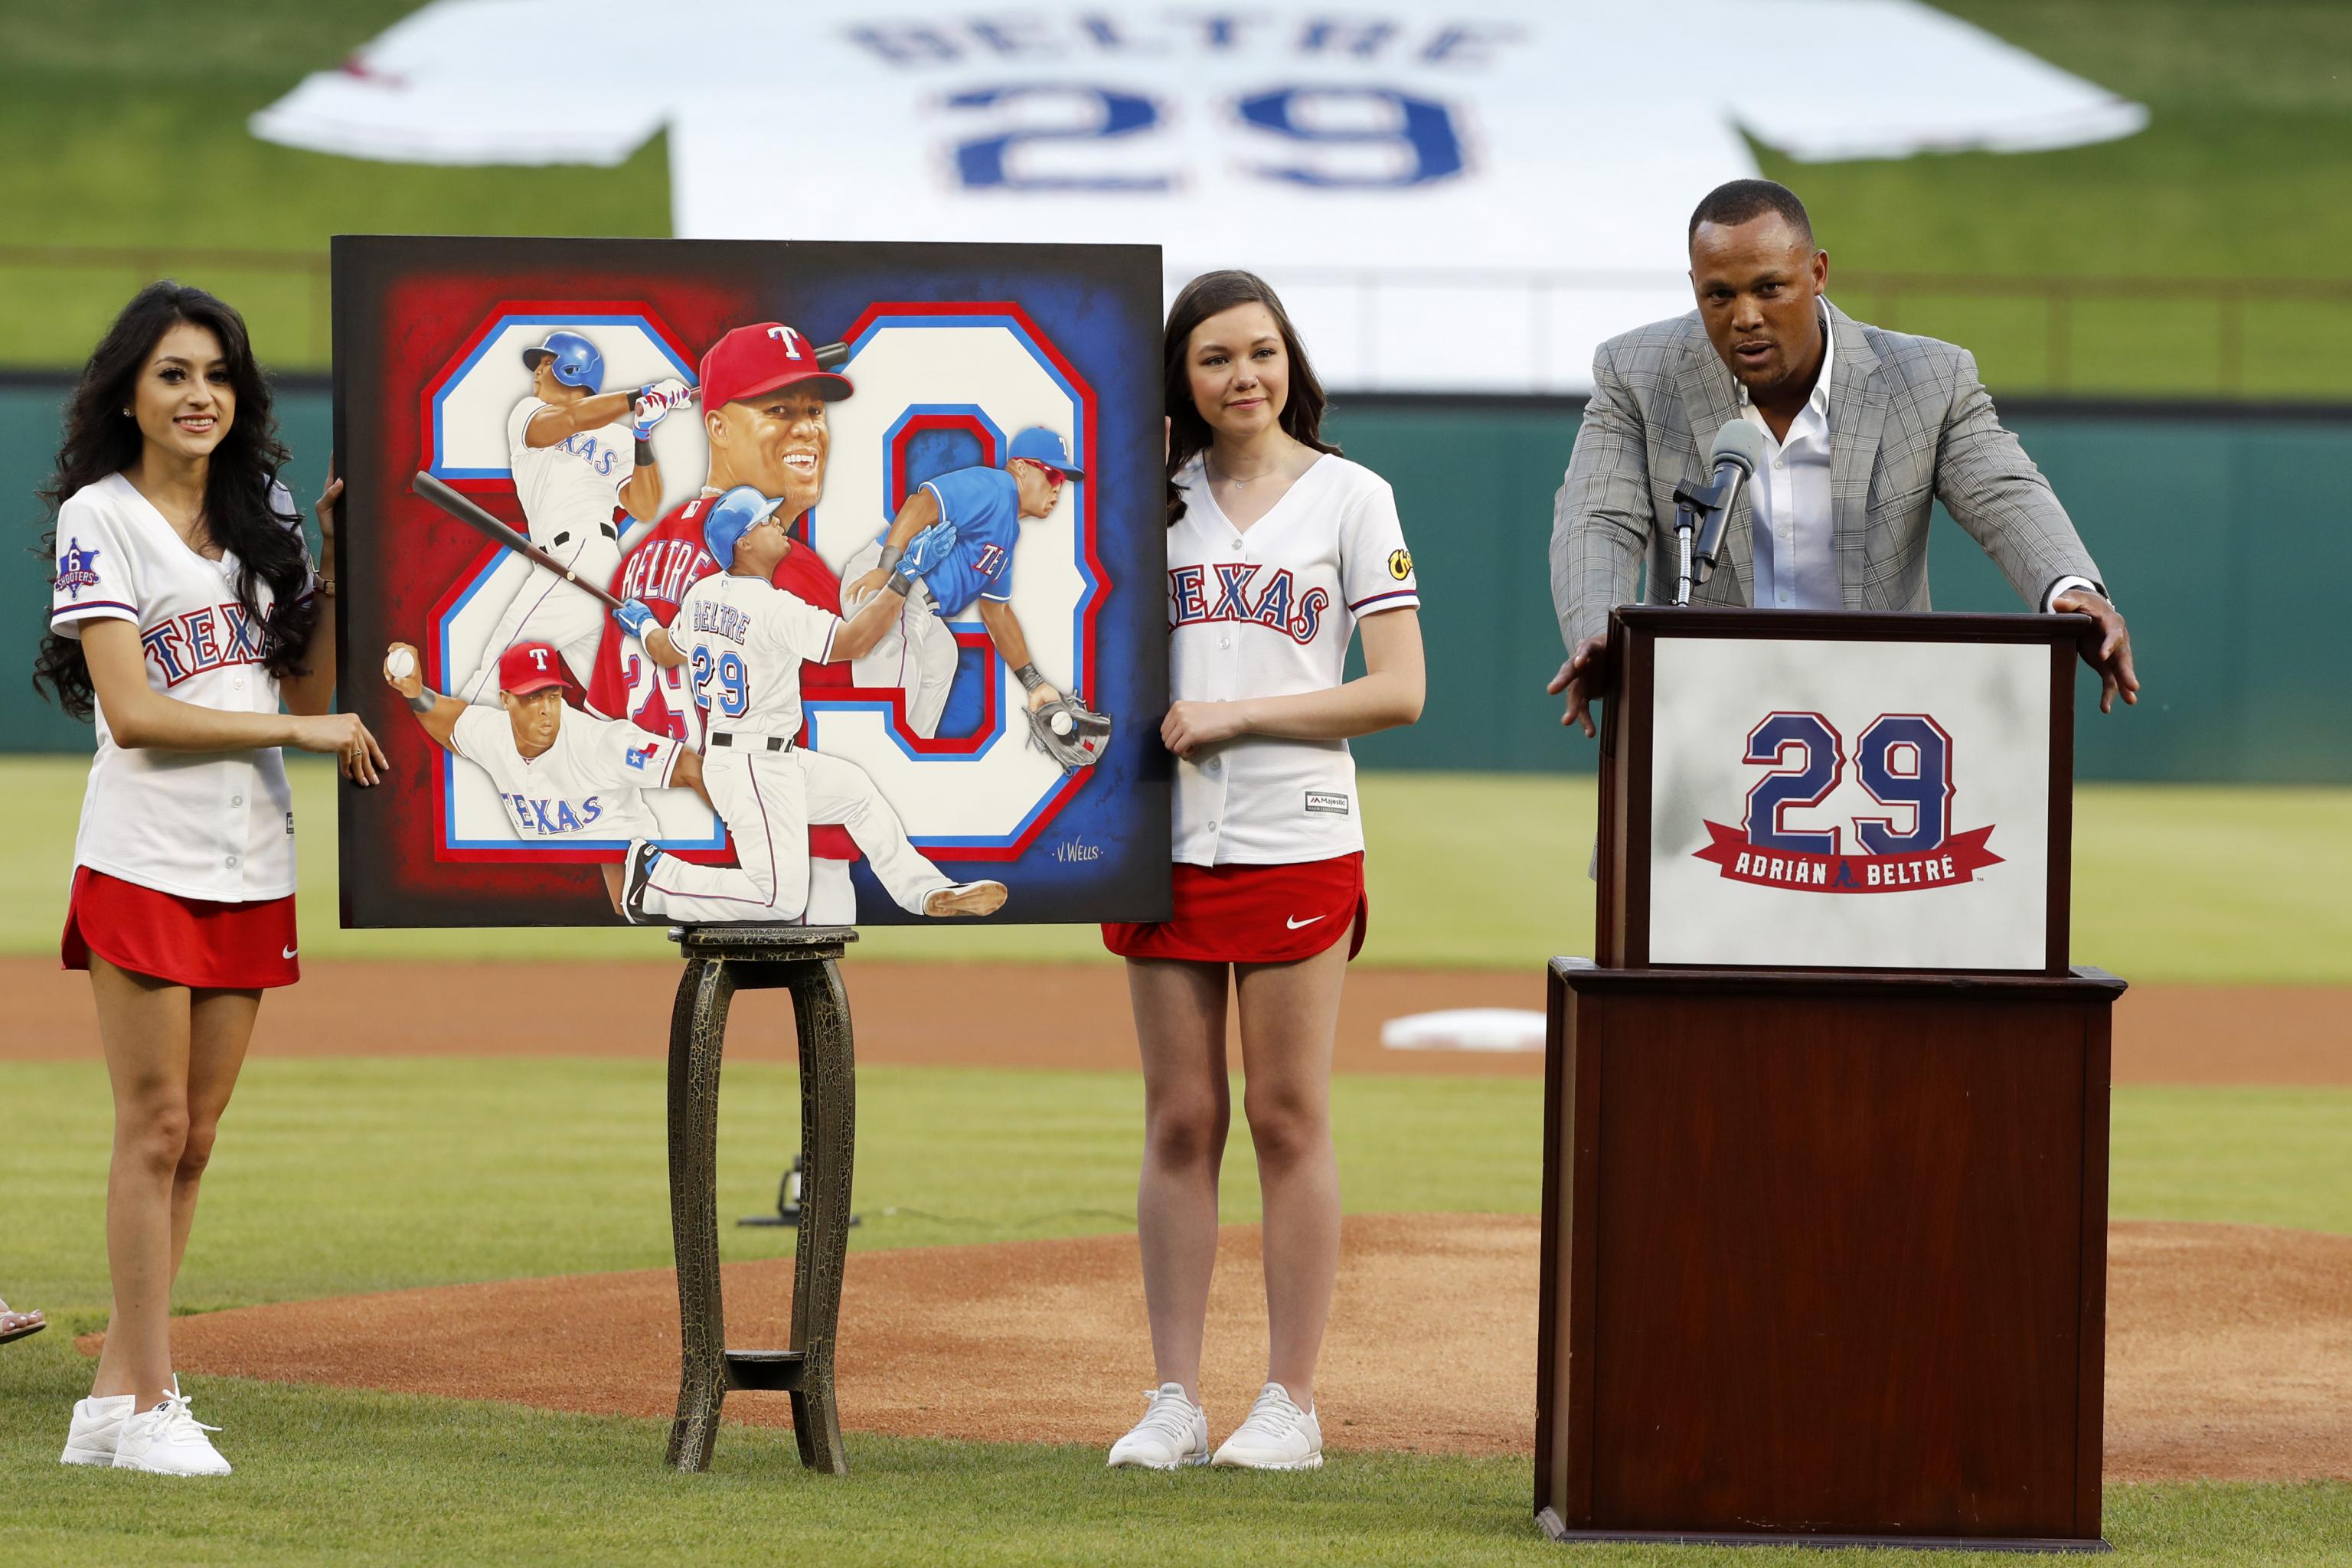 PHOTOS: Relive the retirement of Adrian Beltre's No. 29 Texas